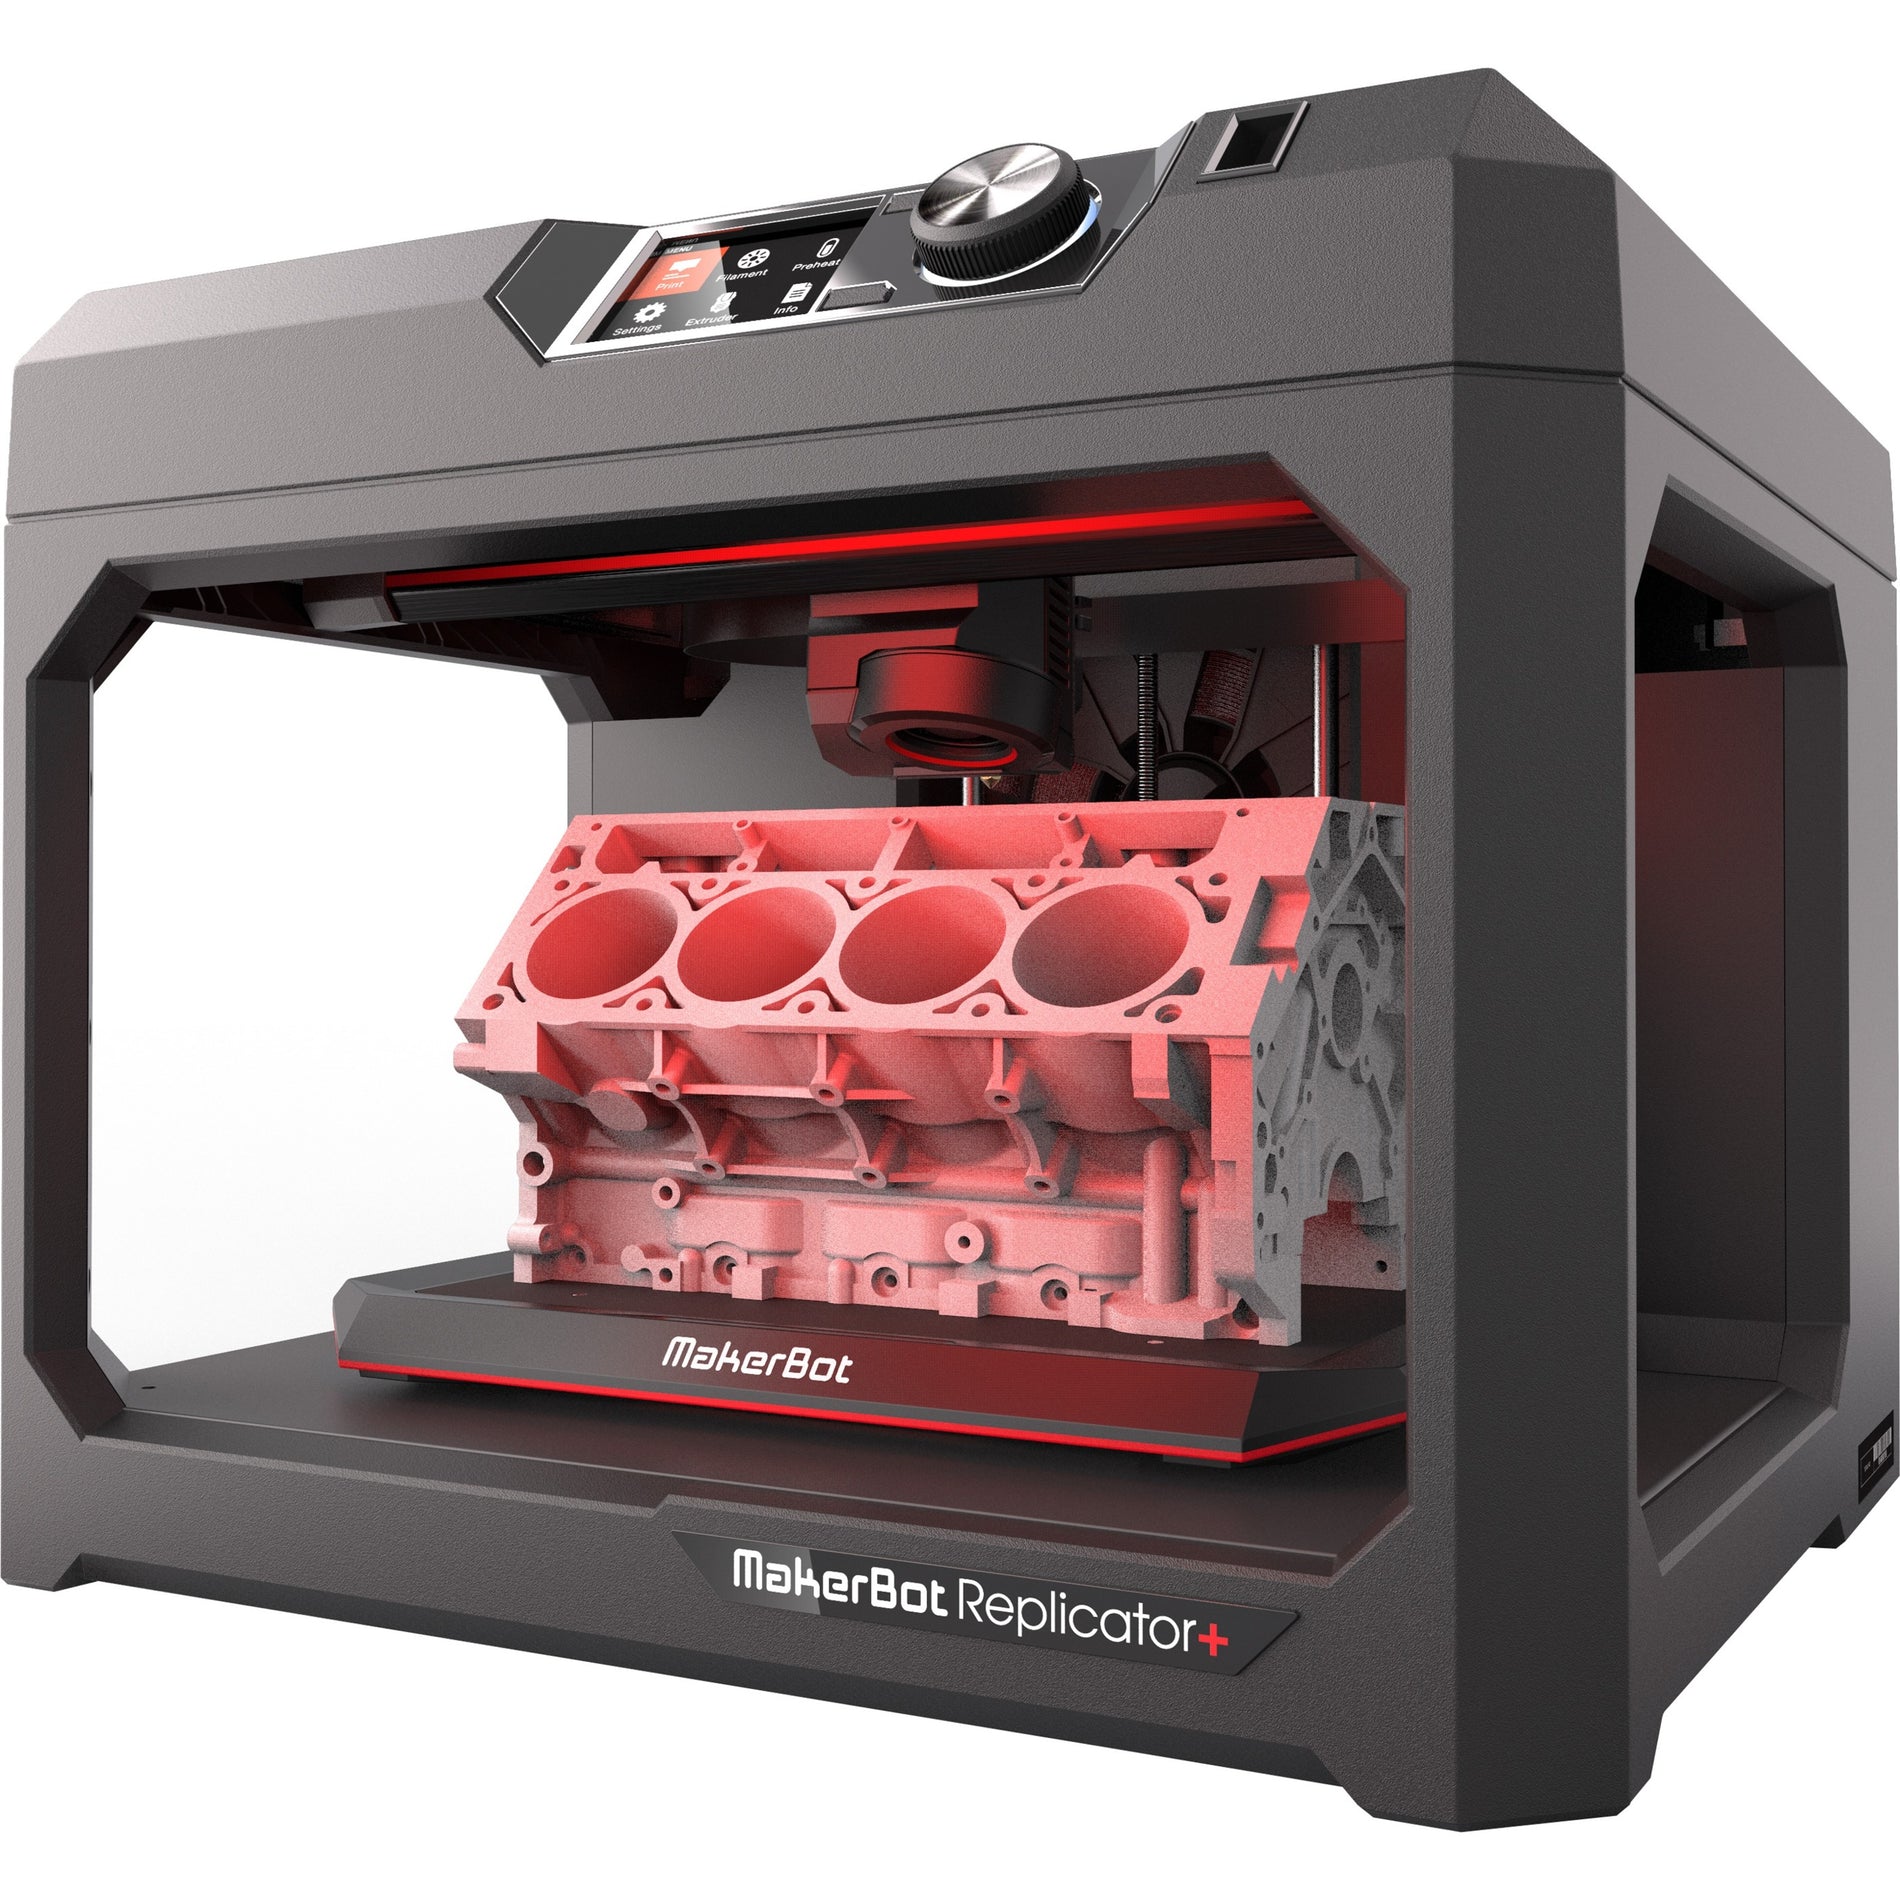 MakerBot Replicator+ 3D Printer - High Precision Printing, Wireless Connectivity [Discontinued]